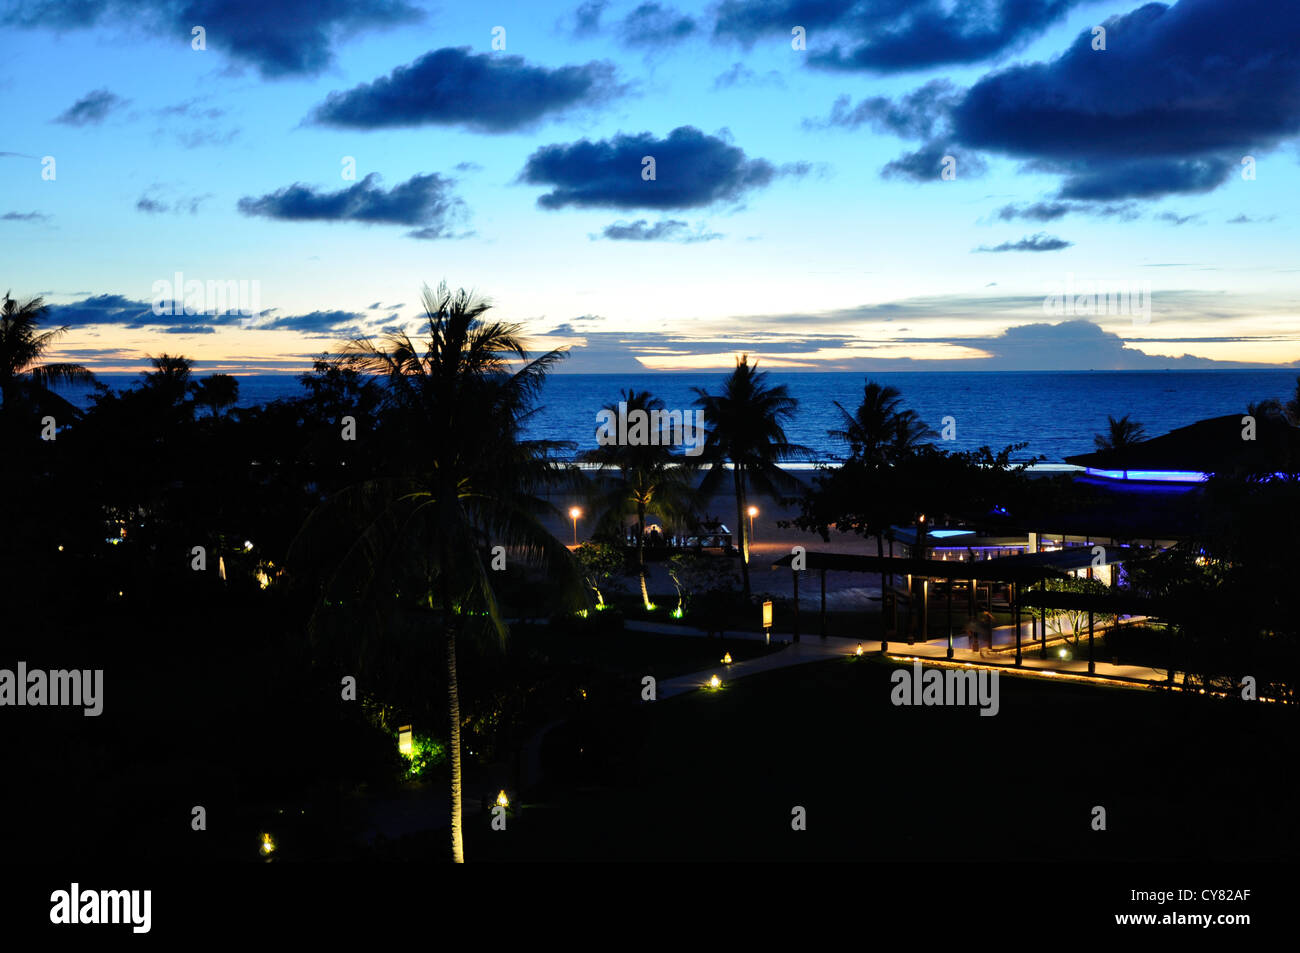 View from Shangri La hotel out to sea in Sabah, Borneo, Malaysia Stock Photo